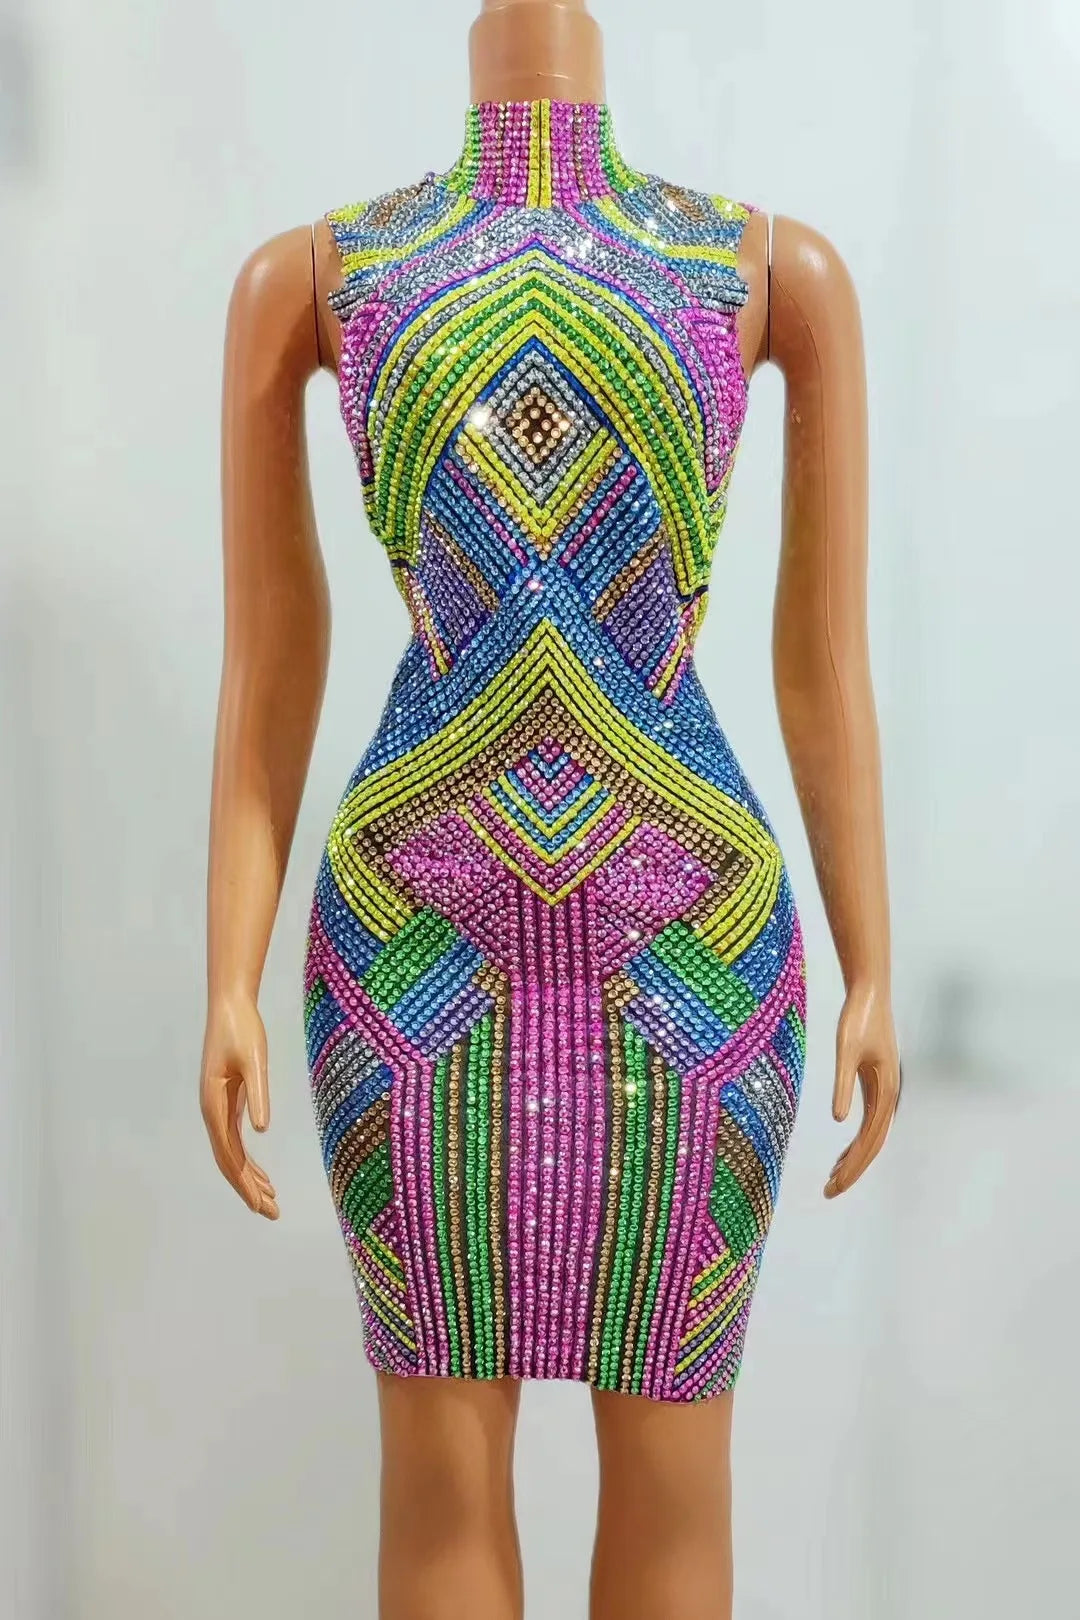 Sexy Stage Colorful Rhinestones Dress Women New Styles High Neck Colorful Gown Unique Formal Costumes Photo Shoot Dress